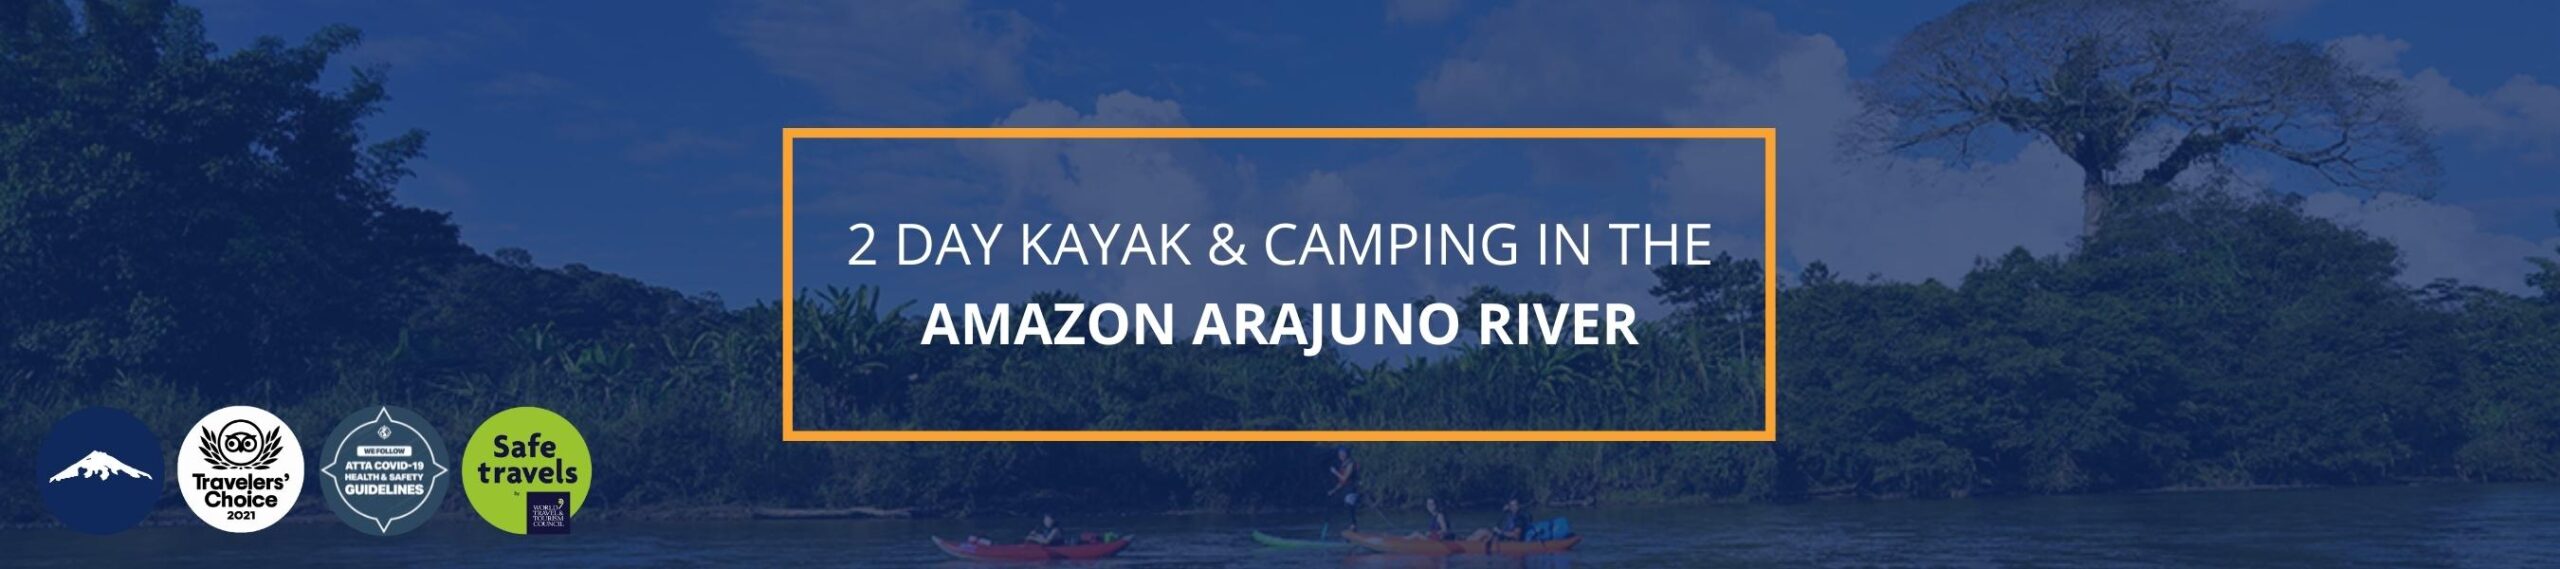 2 Day Kayak and Camping in the Amazon Arajuno River